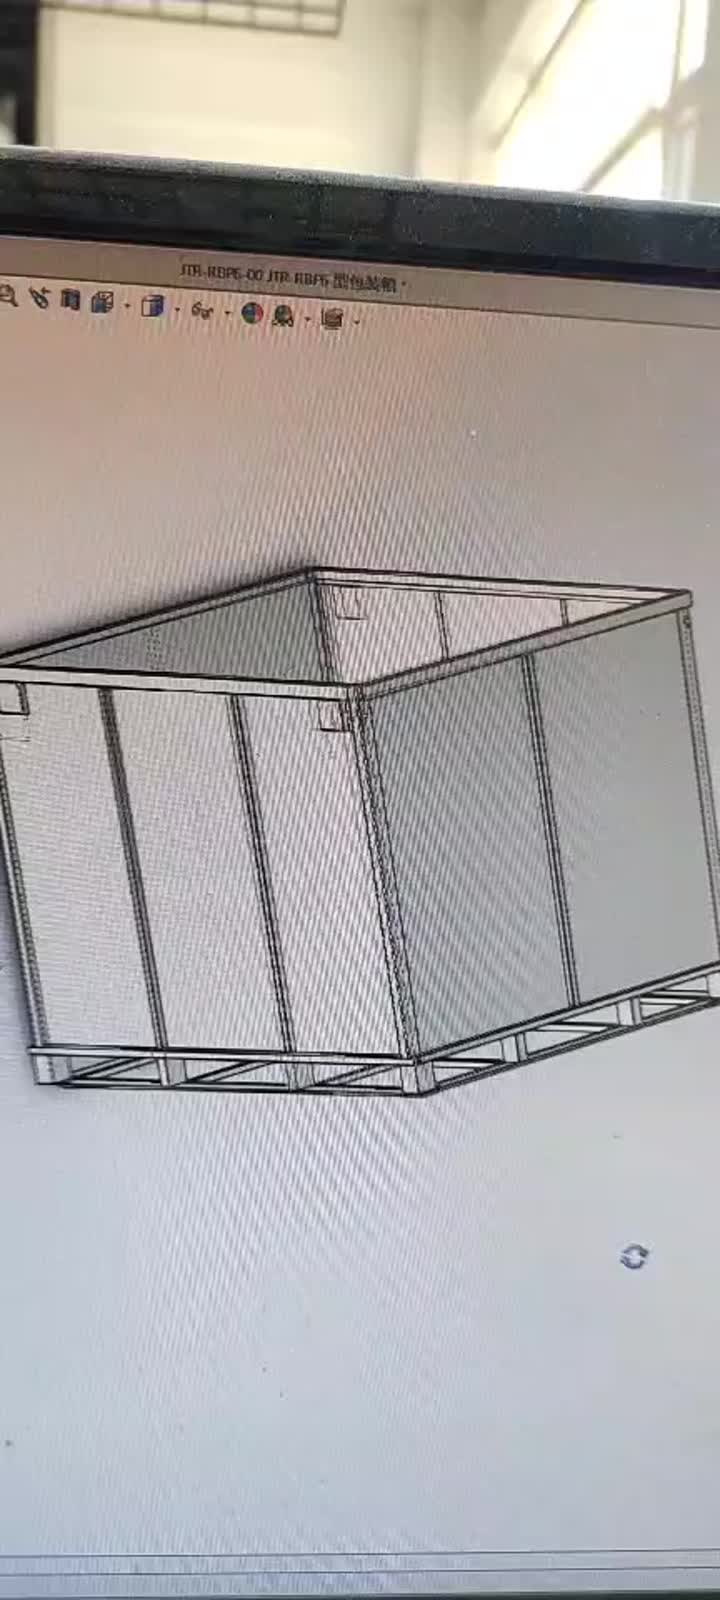 Steel Packing Box.mp4